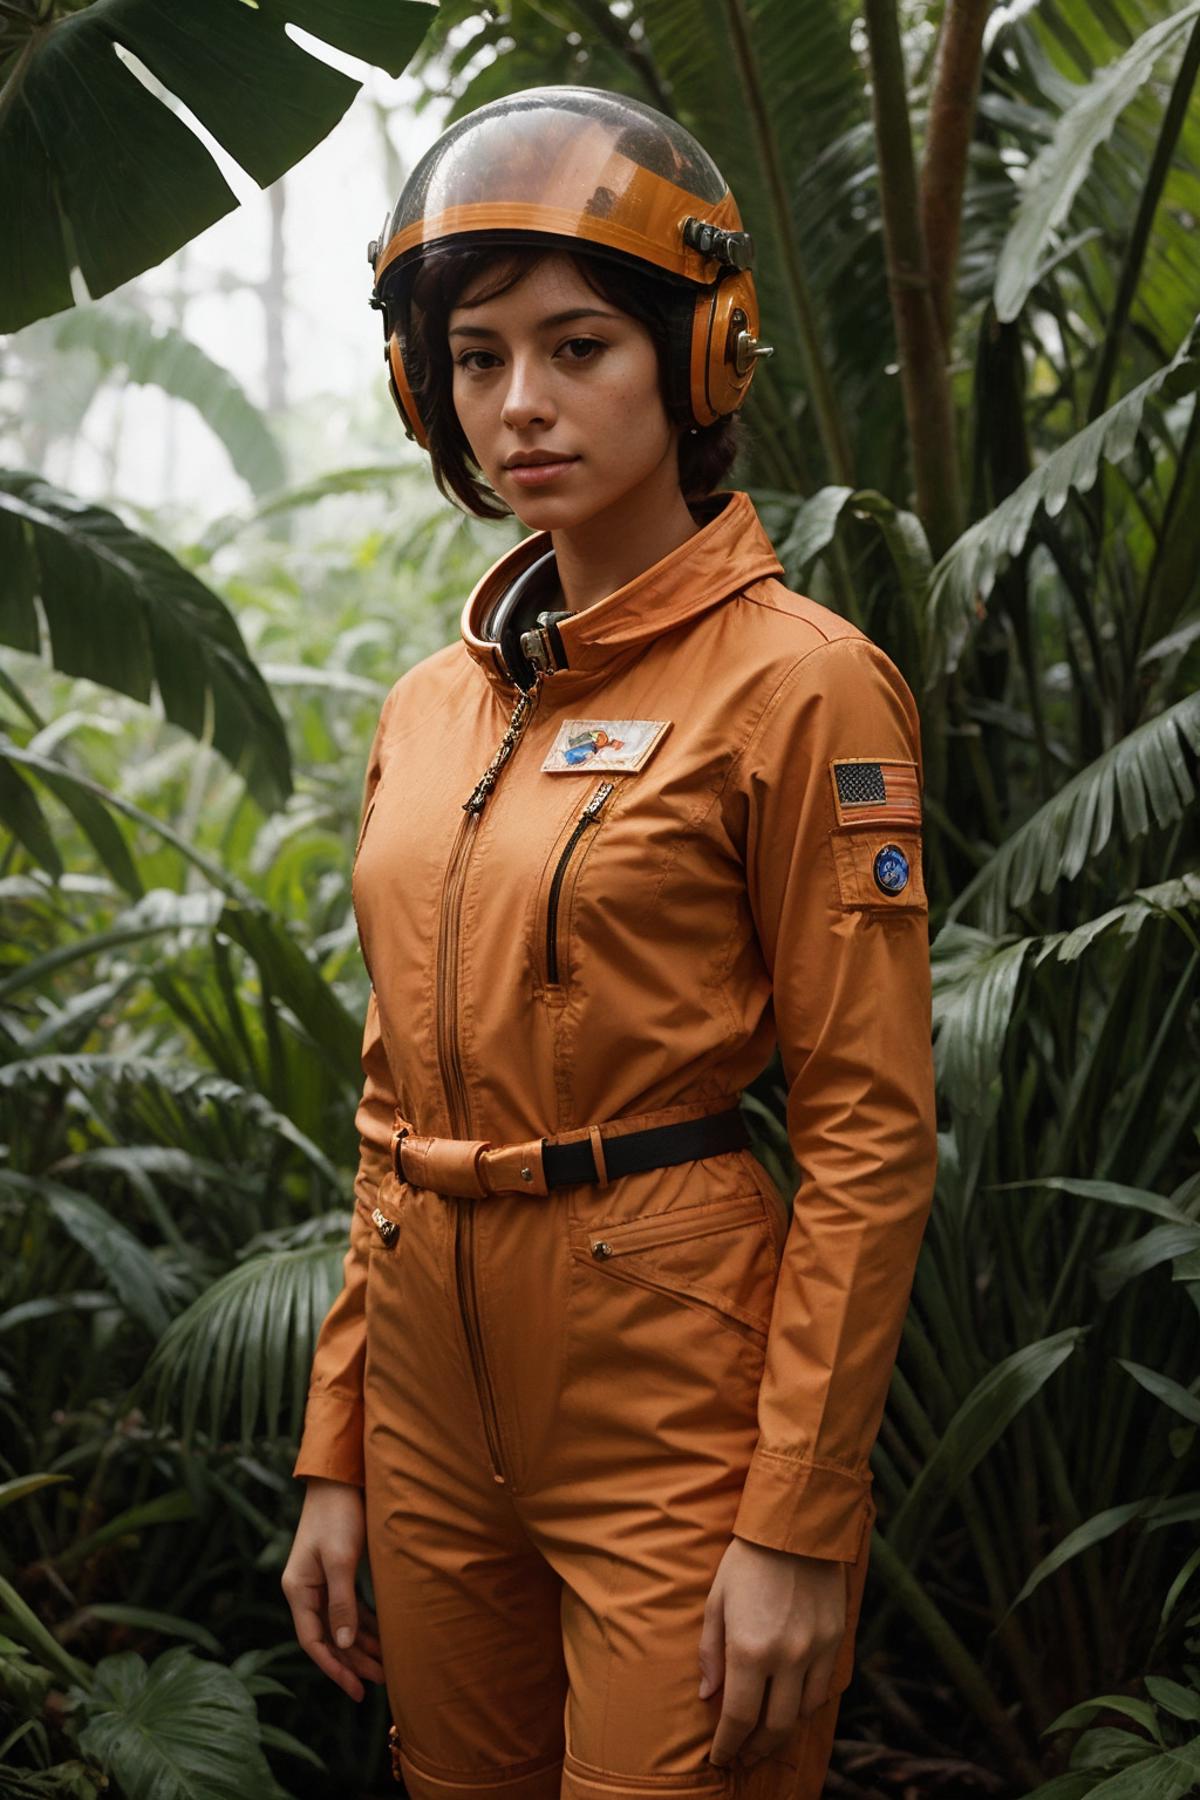 Woman in orange astronaut suit with headphones on and surrounded by plants.